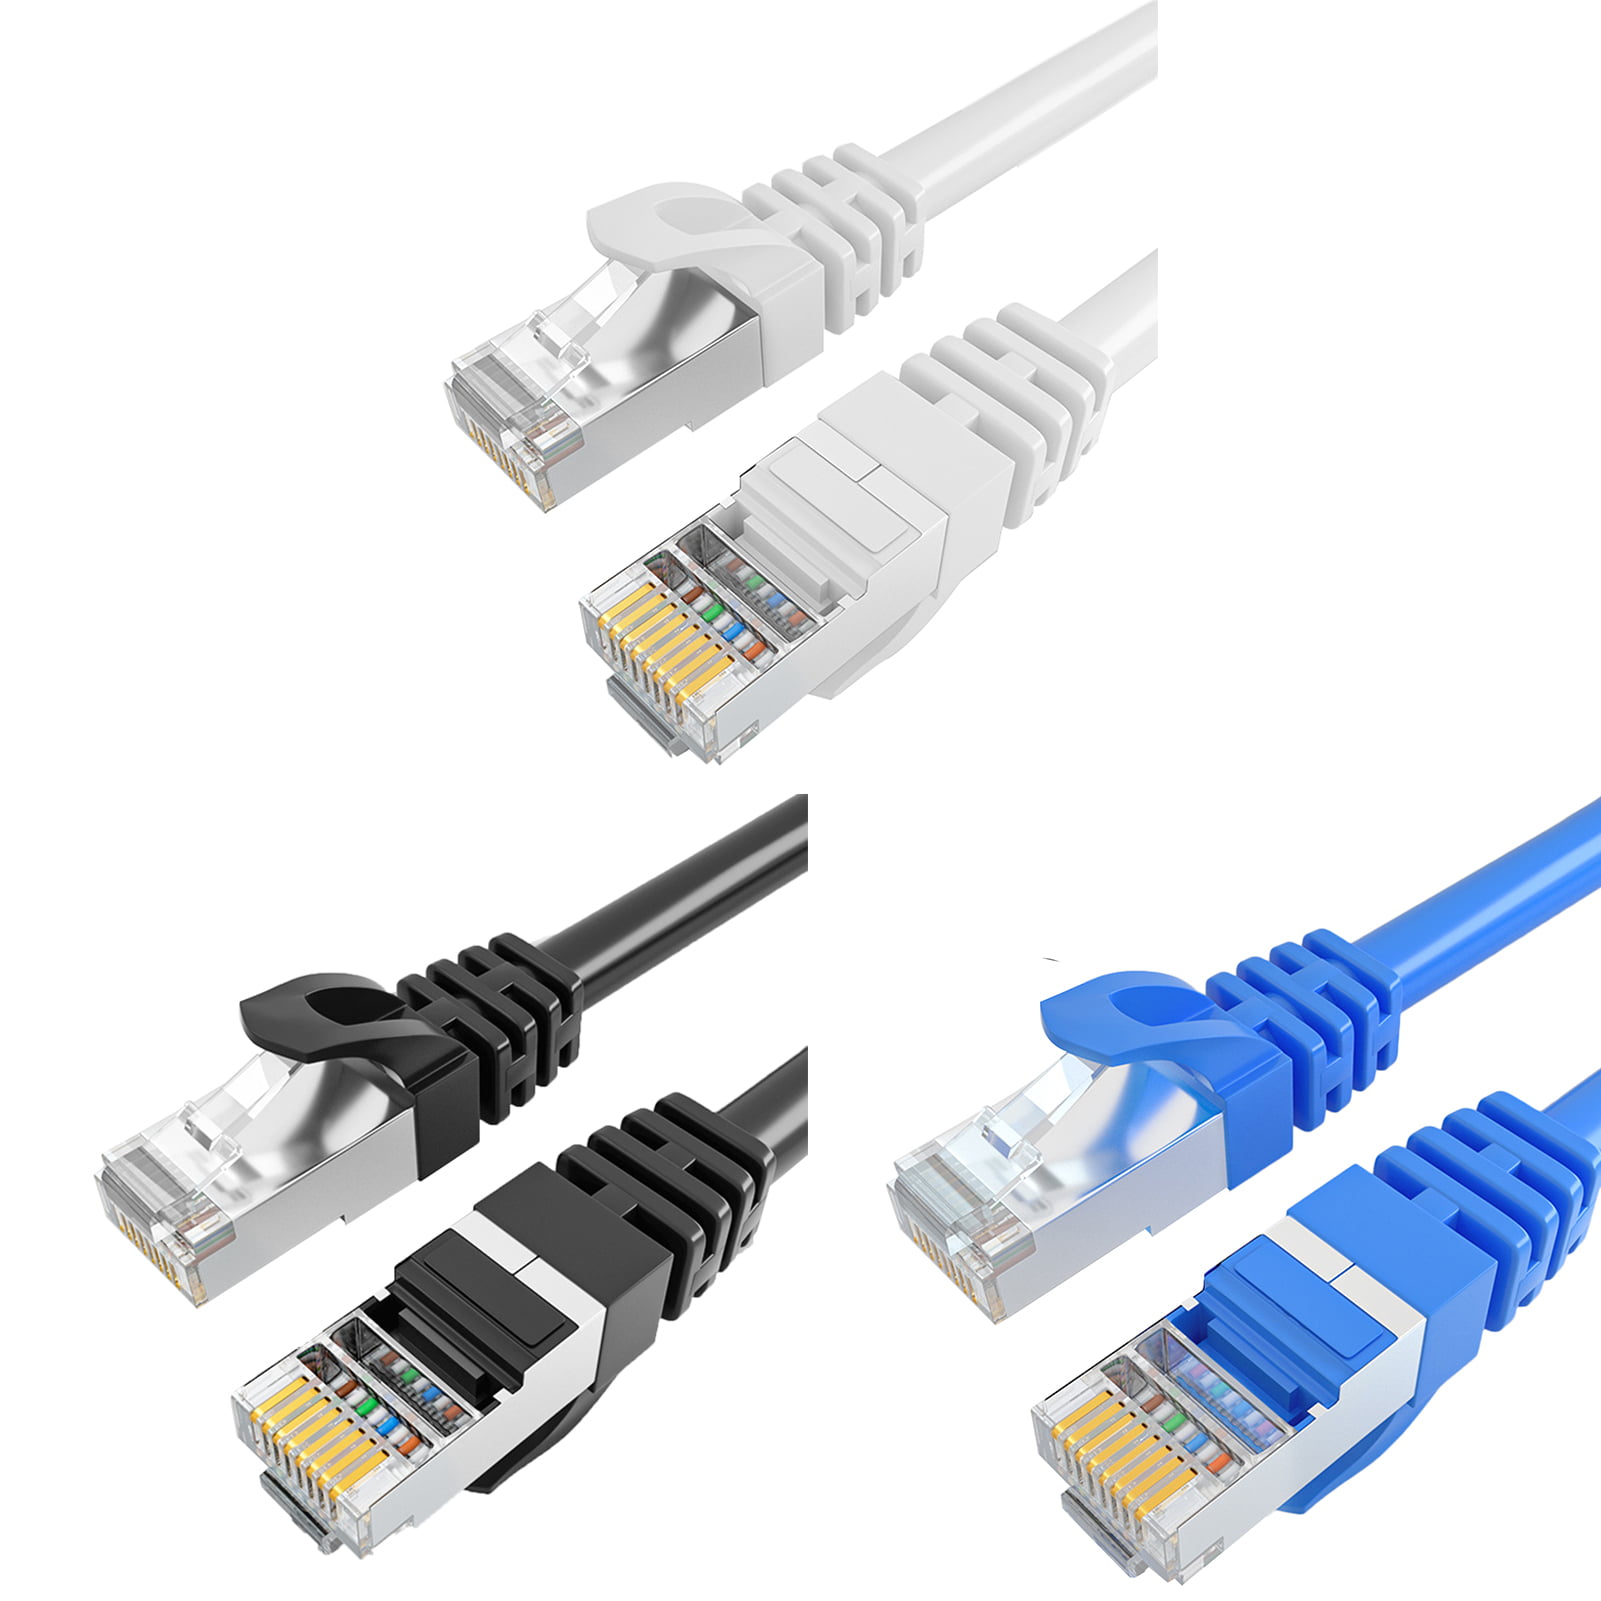 Home Ethernet Cable Game Network Cable Ethernet Cable Cat7 LAN Cable STP RJ 45 Network Cable RJ45 Patch Cord /15m/20m/30m for Router Laptop Ethernet Cable Waterproof Cable 